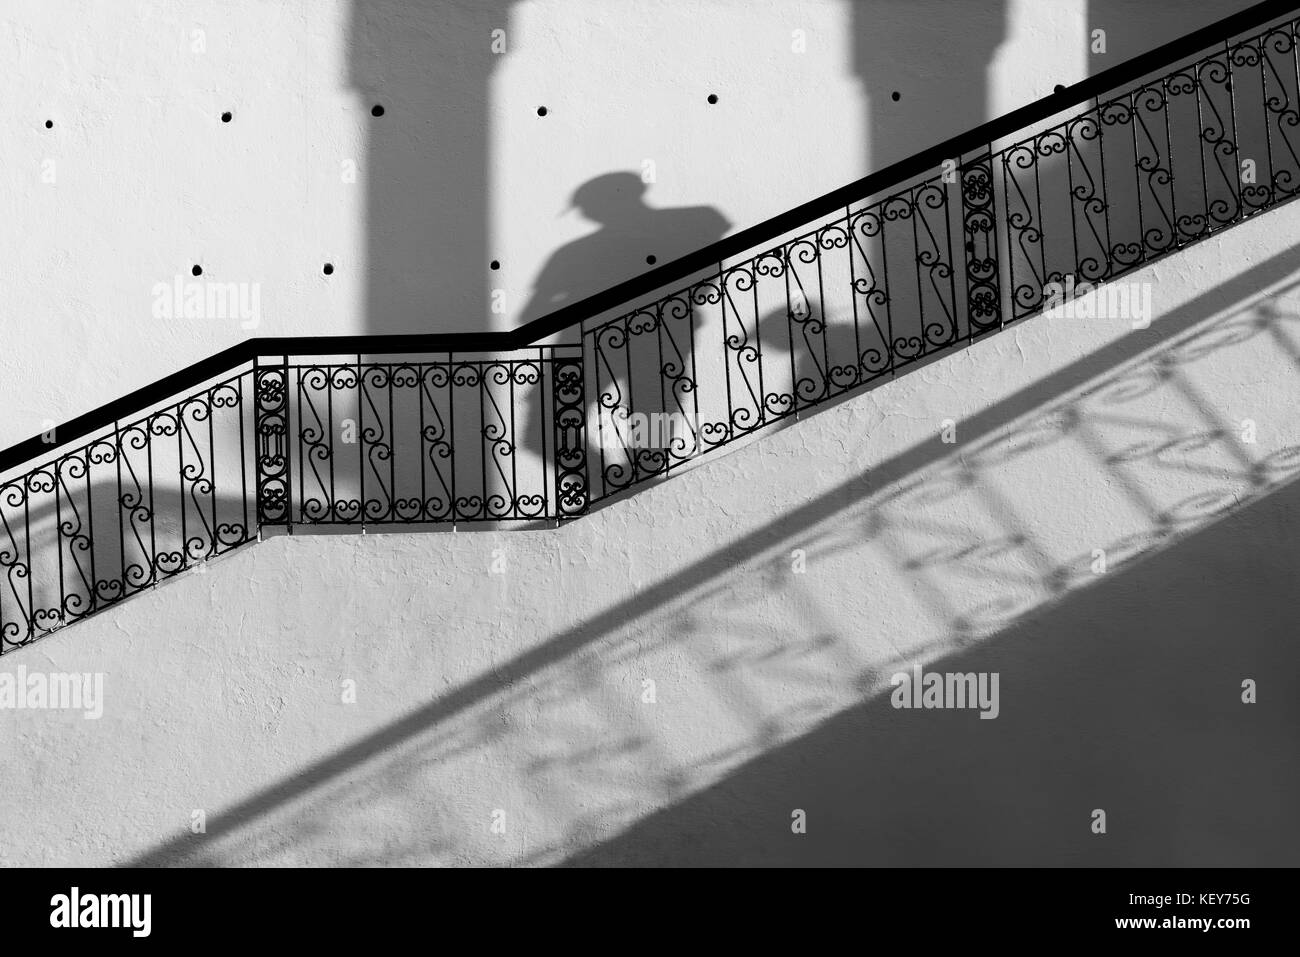 Staircase with black banister against white wall, with shadows of a man walking down. Black and white, monochrome image. Stock Photo